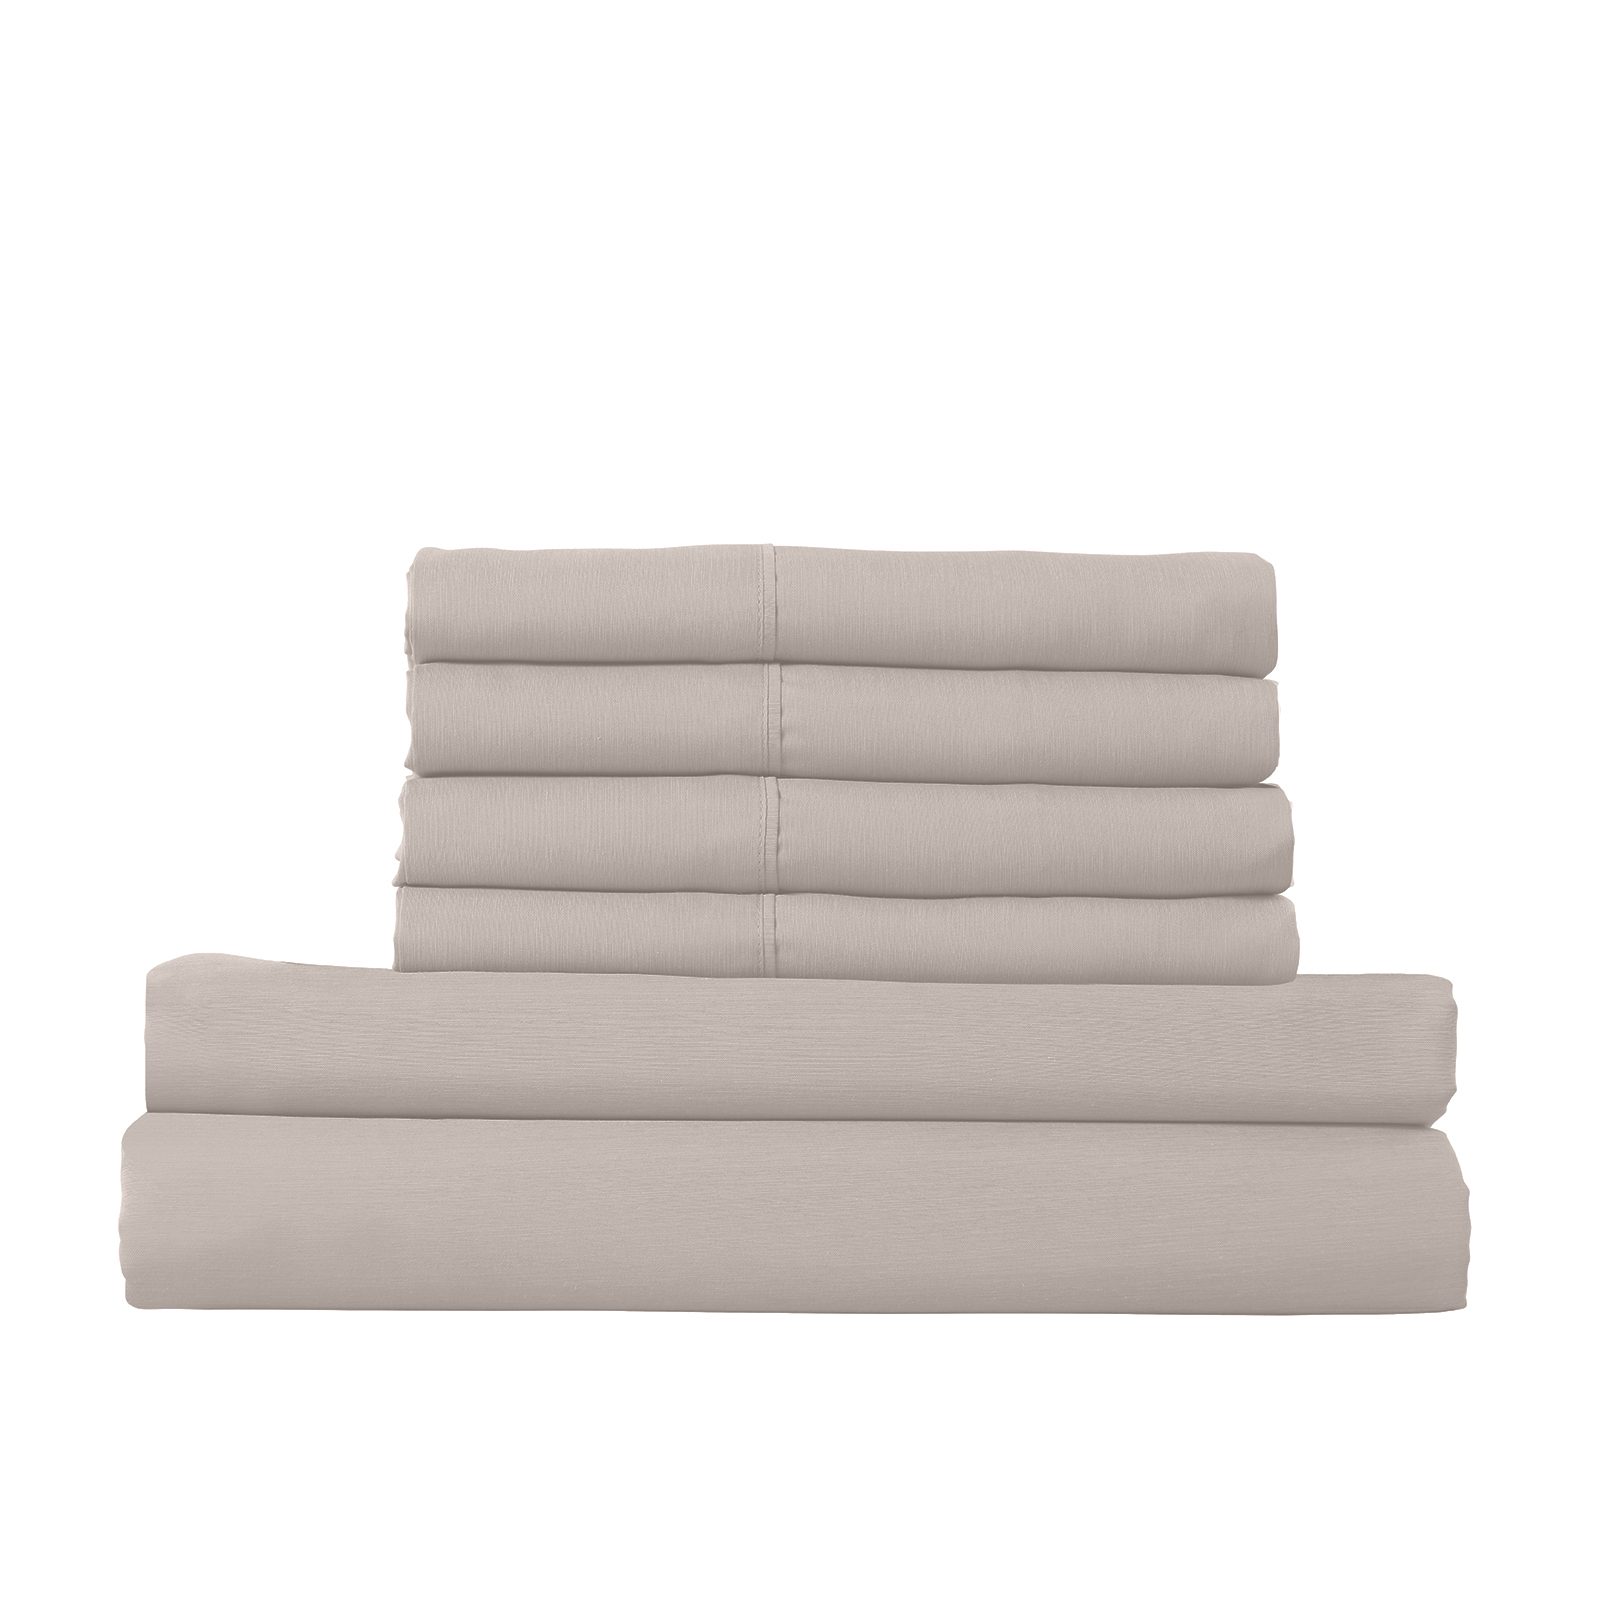 Royal Comfort 1500 Thread Count 6 Piece Cotton Rich Bedroom Collection Set - Queen - Stone